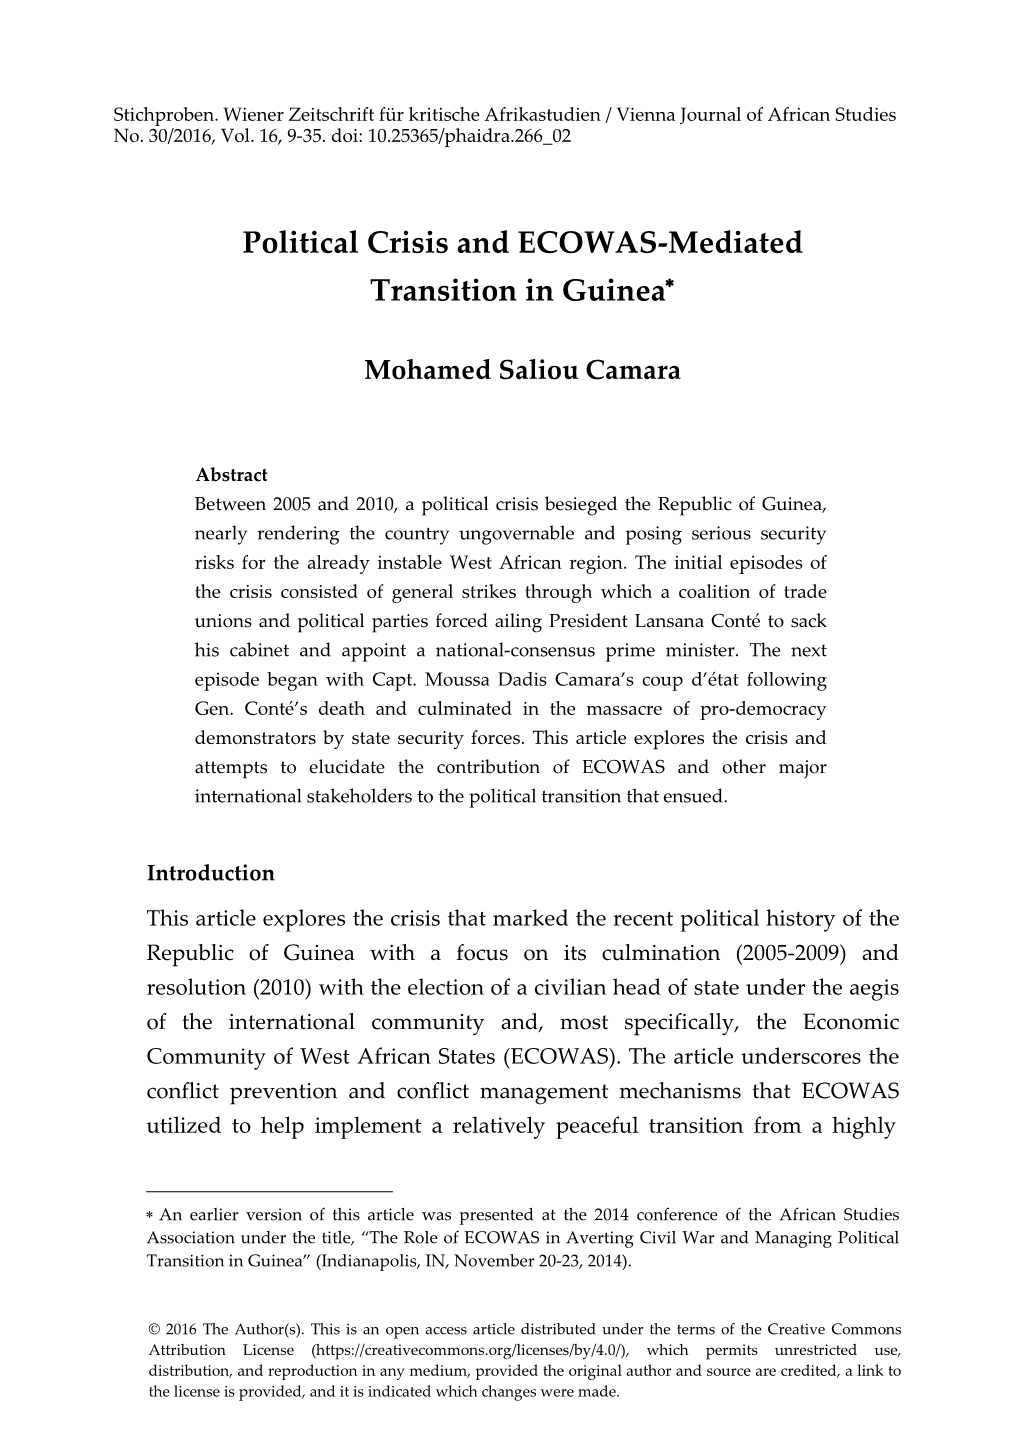 Political Crisis and ECOWAS-Mediated Transition in Guinea∗